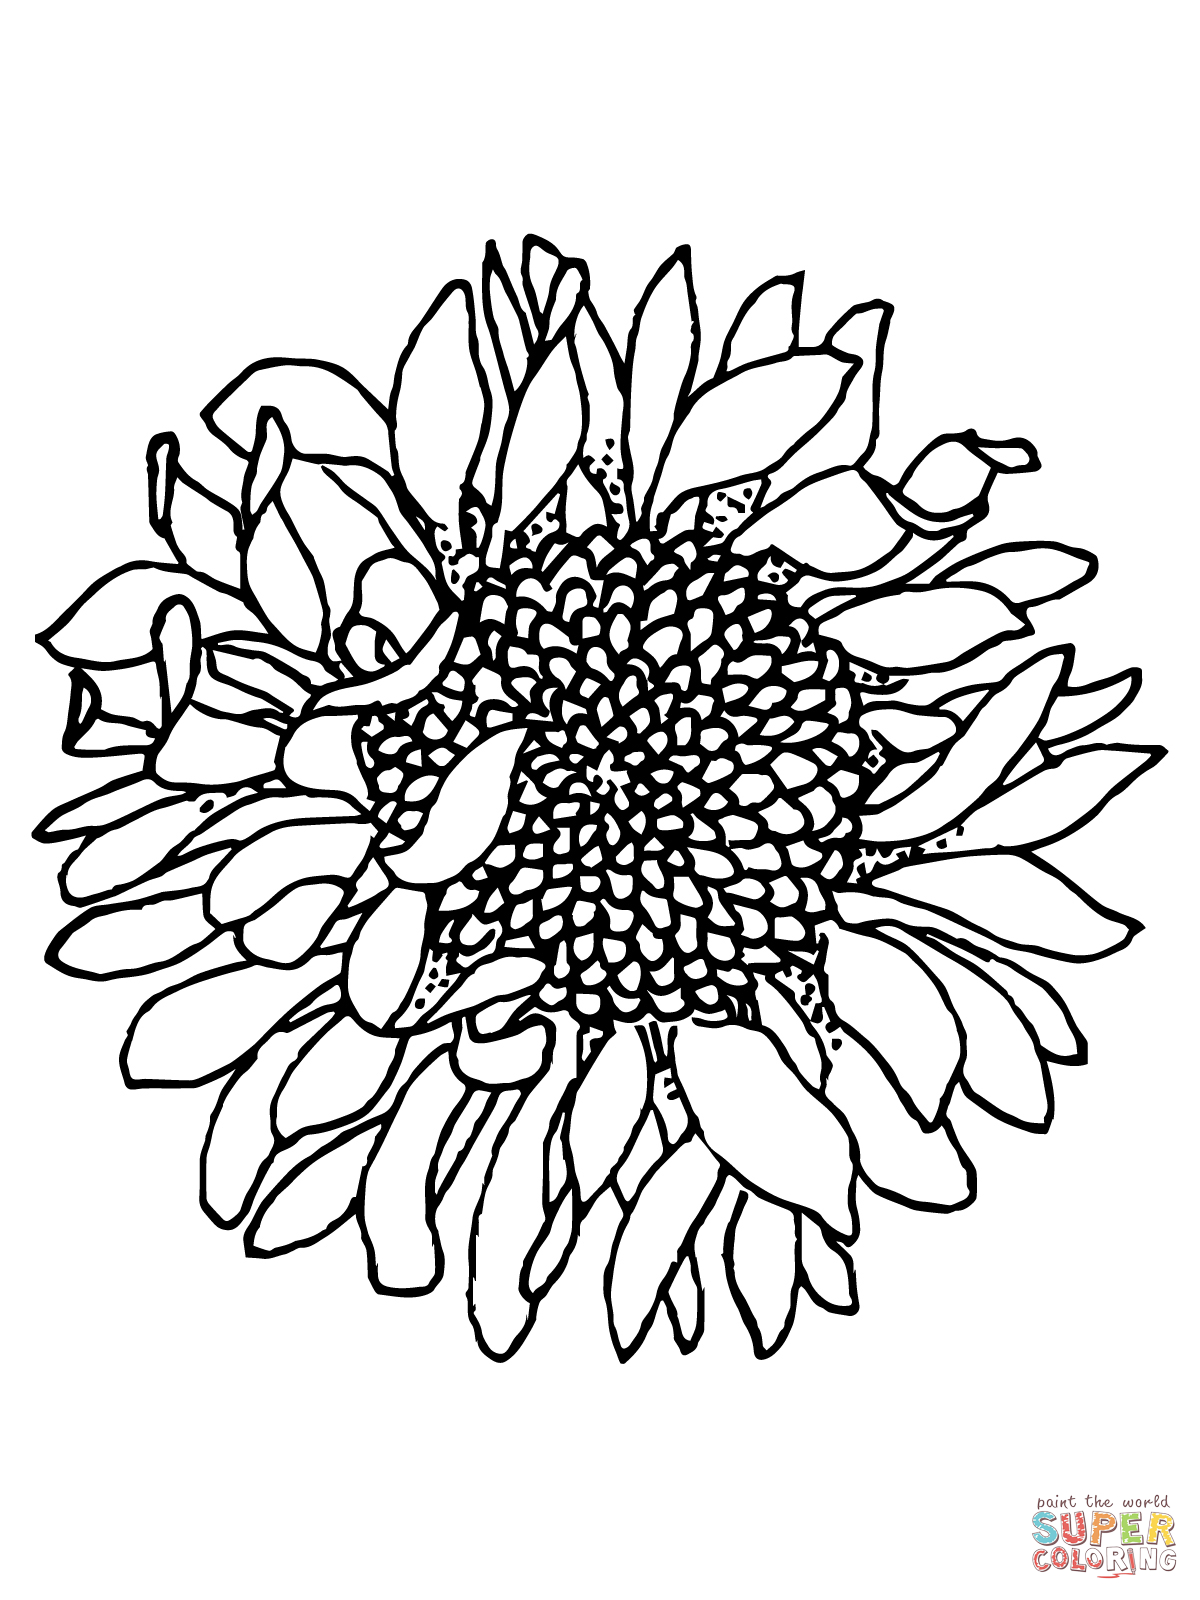 Free Sunflower Coloring Page, Download Free Sunflower Coloring Page png